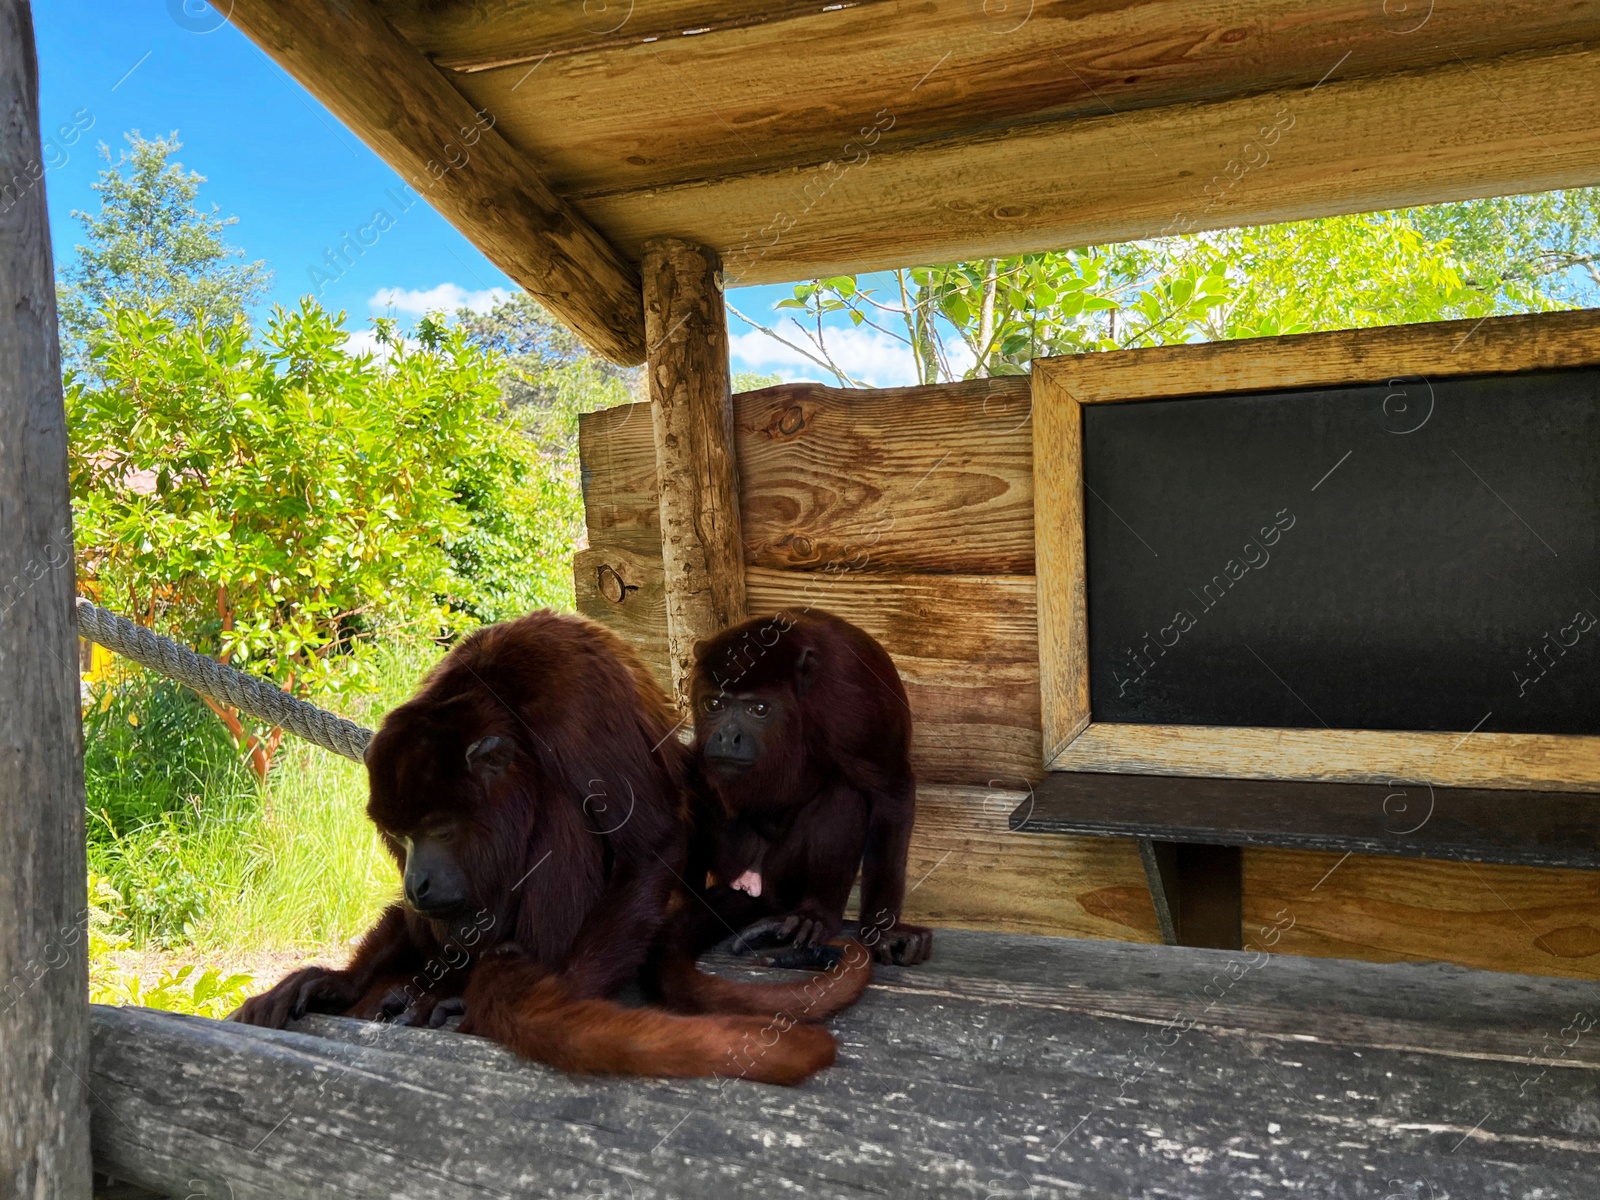 Photo of Cute chimpanzees in wooden gazebo outdoors on sunny day